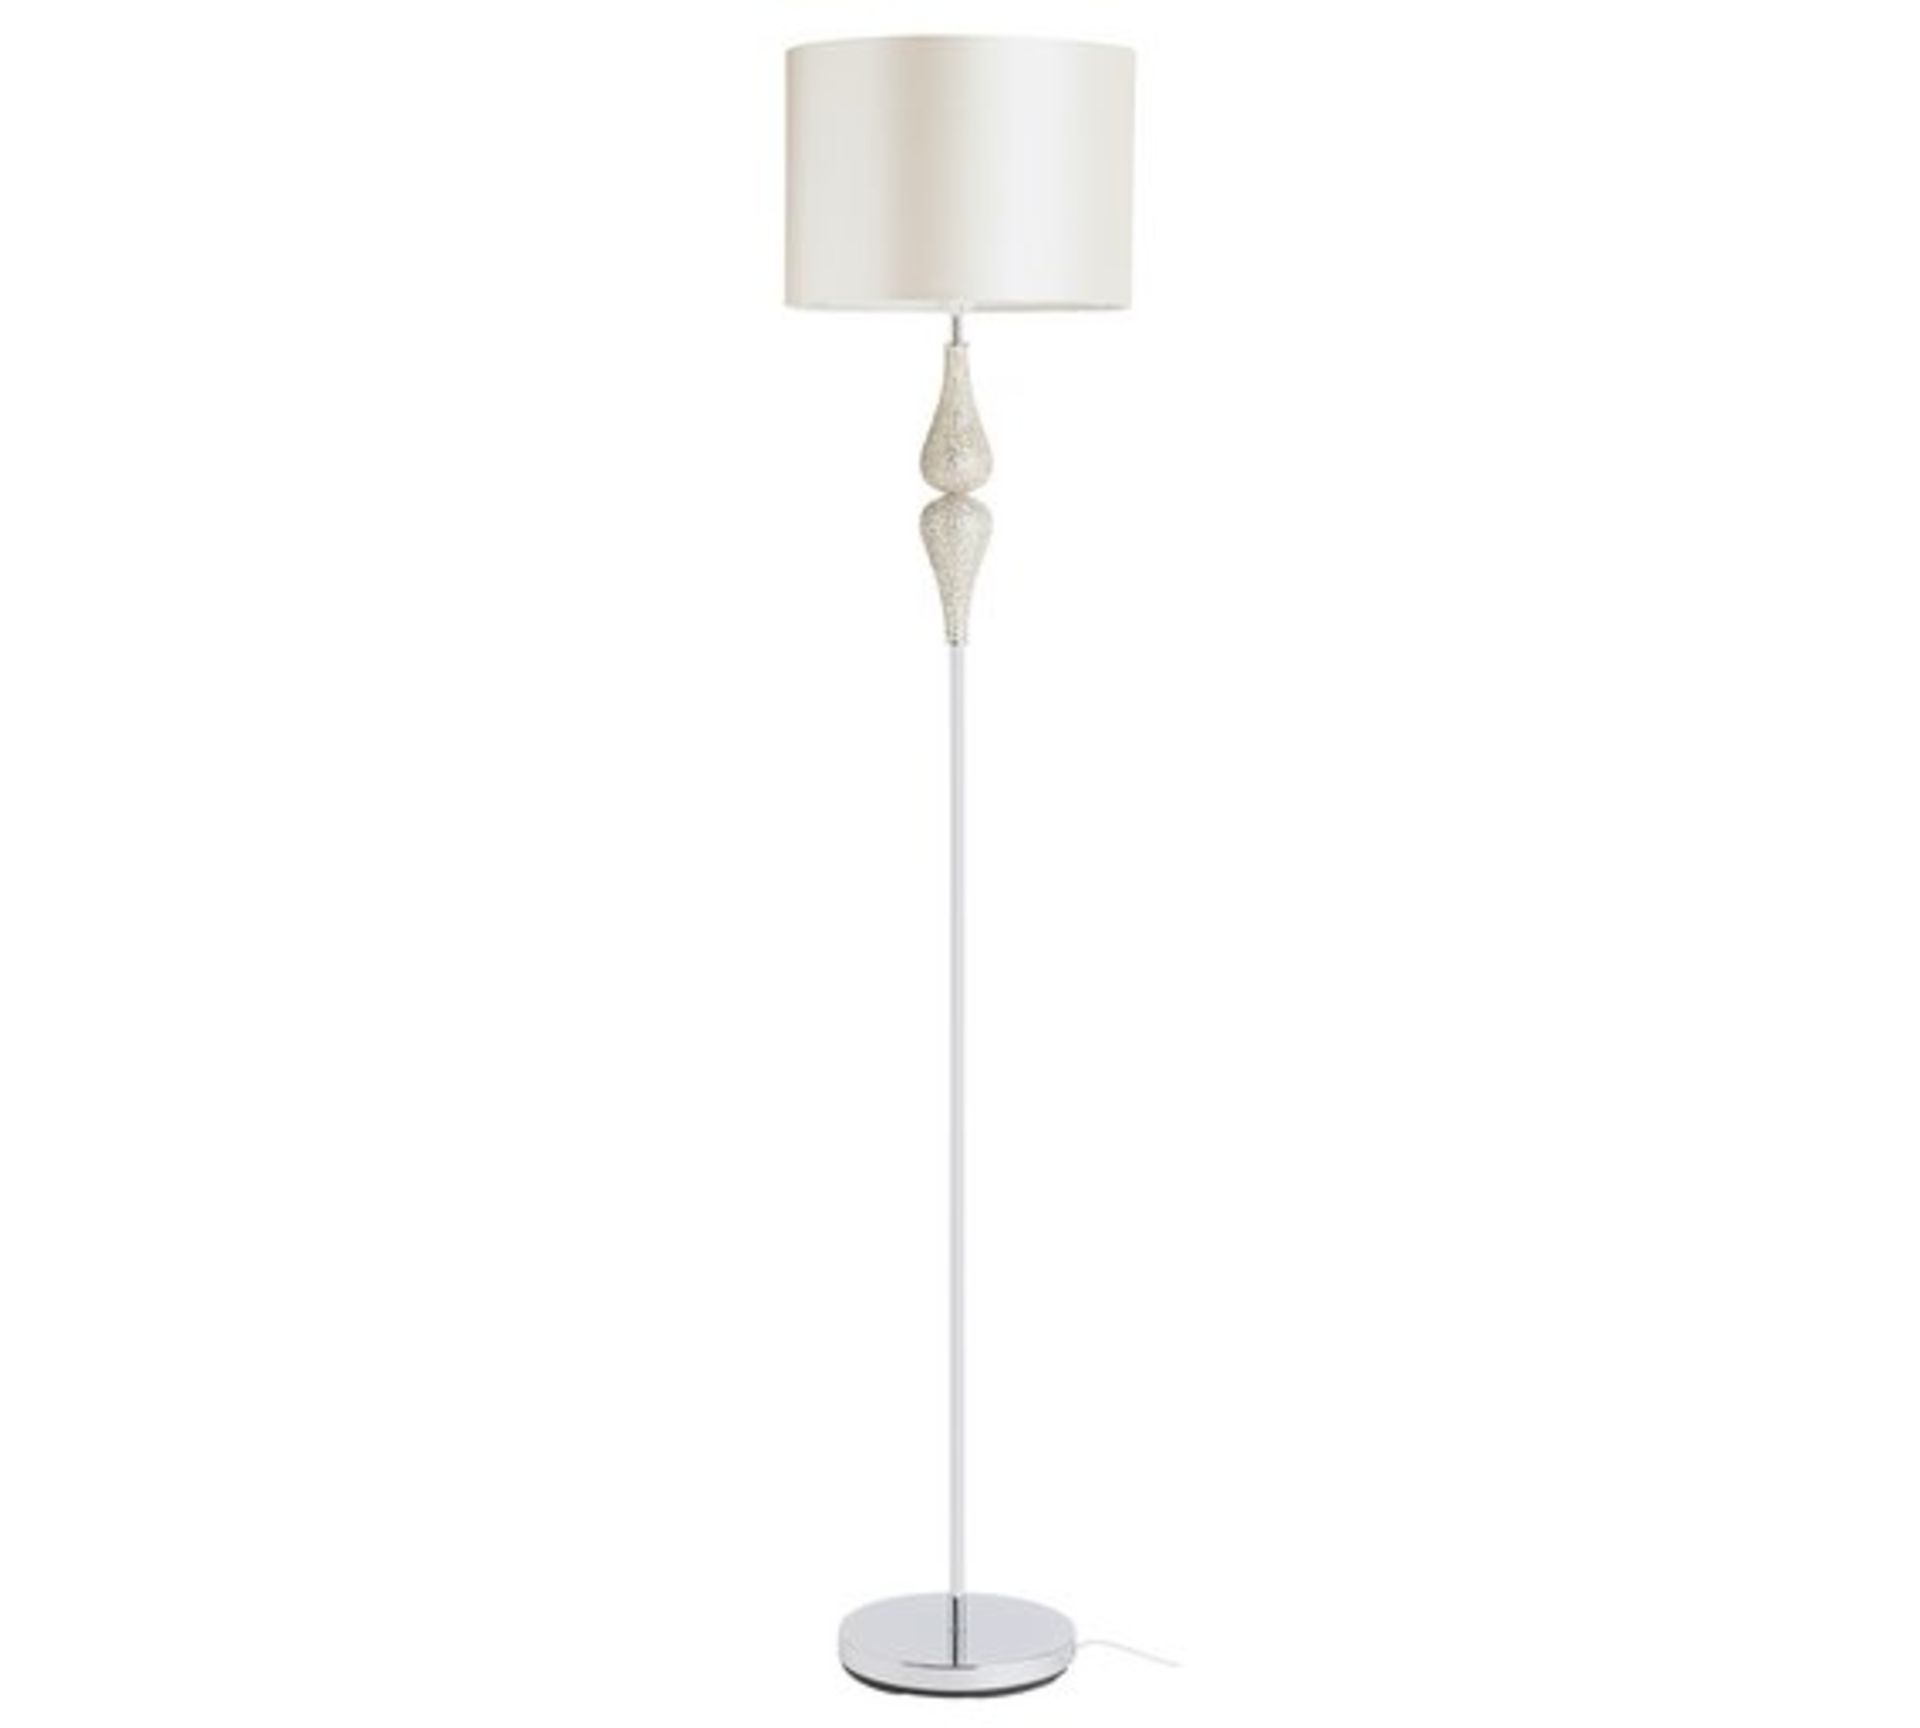 1 BOXED CHECKED AND REFURBISHED ARGOS ELOISE CRACKLE FLOOR LAMP IN CHAMPAGNE GOLD (NO VAT)